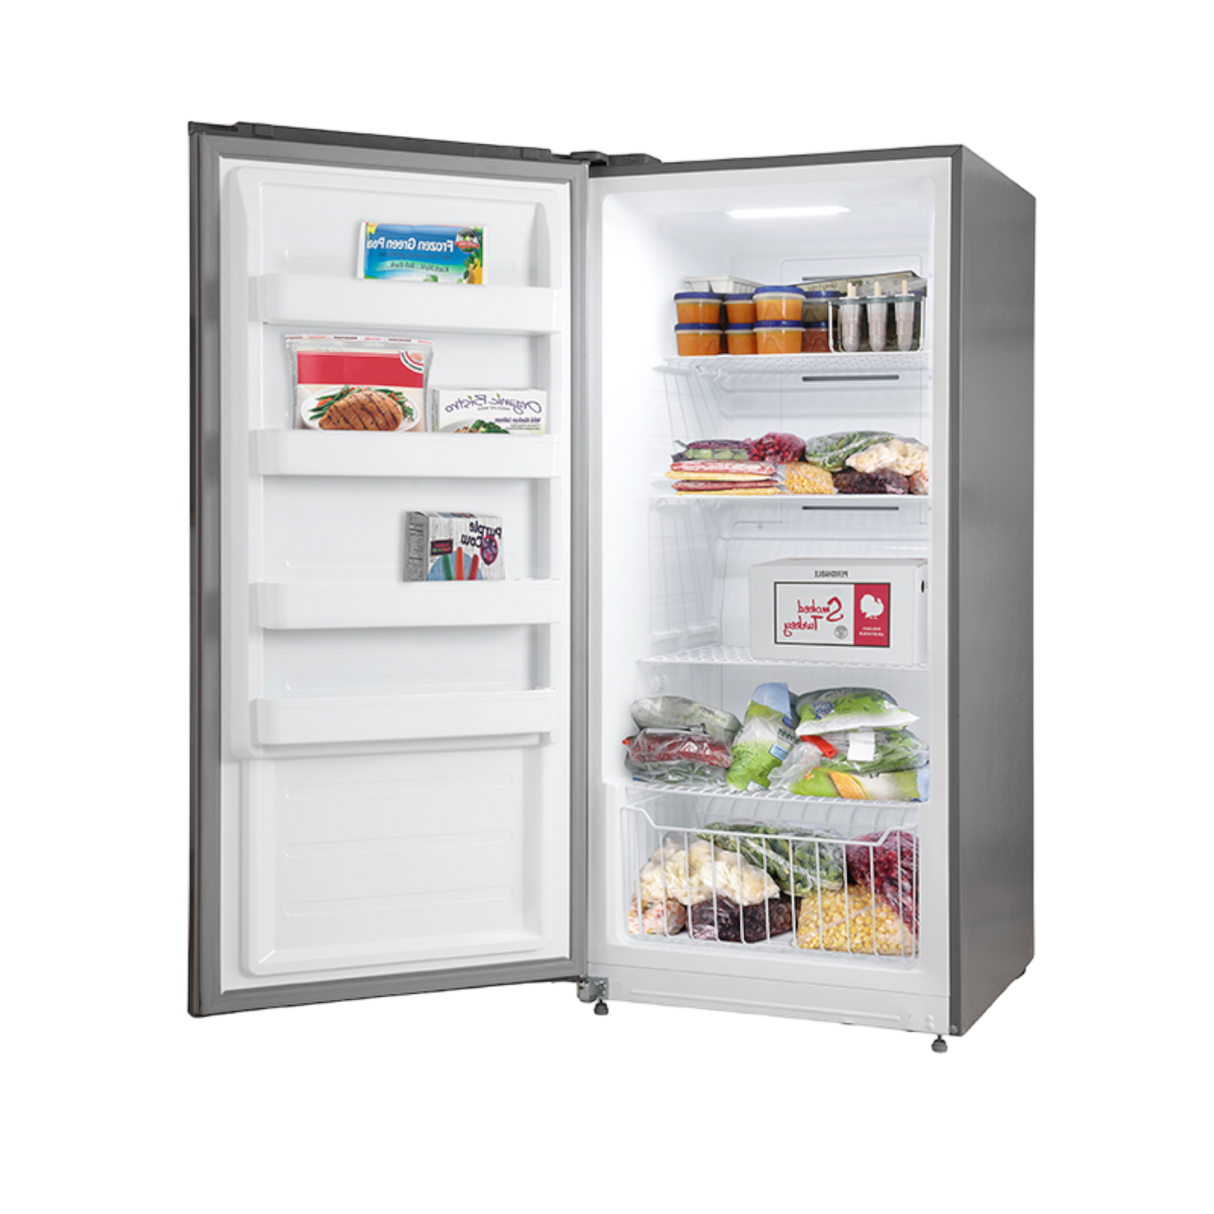 Forno Rizzuto 32" Left Hand Swing Open 13.8 Cu.Ft. Stainless Steel Dual Zone Refrigerator/Freezer